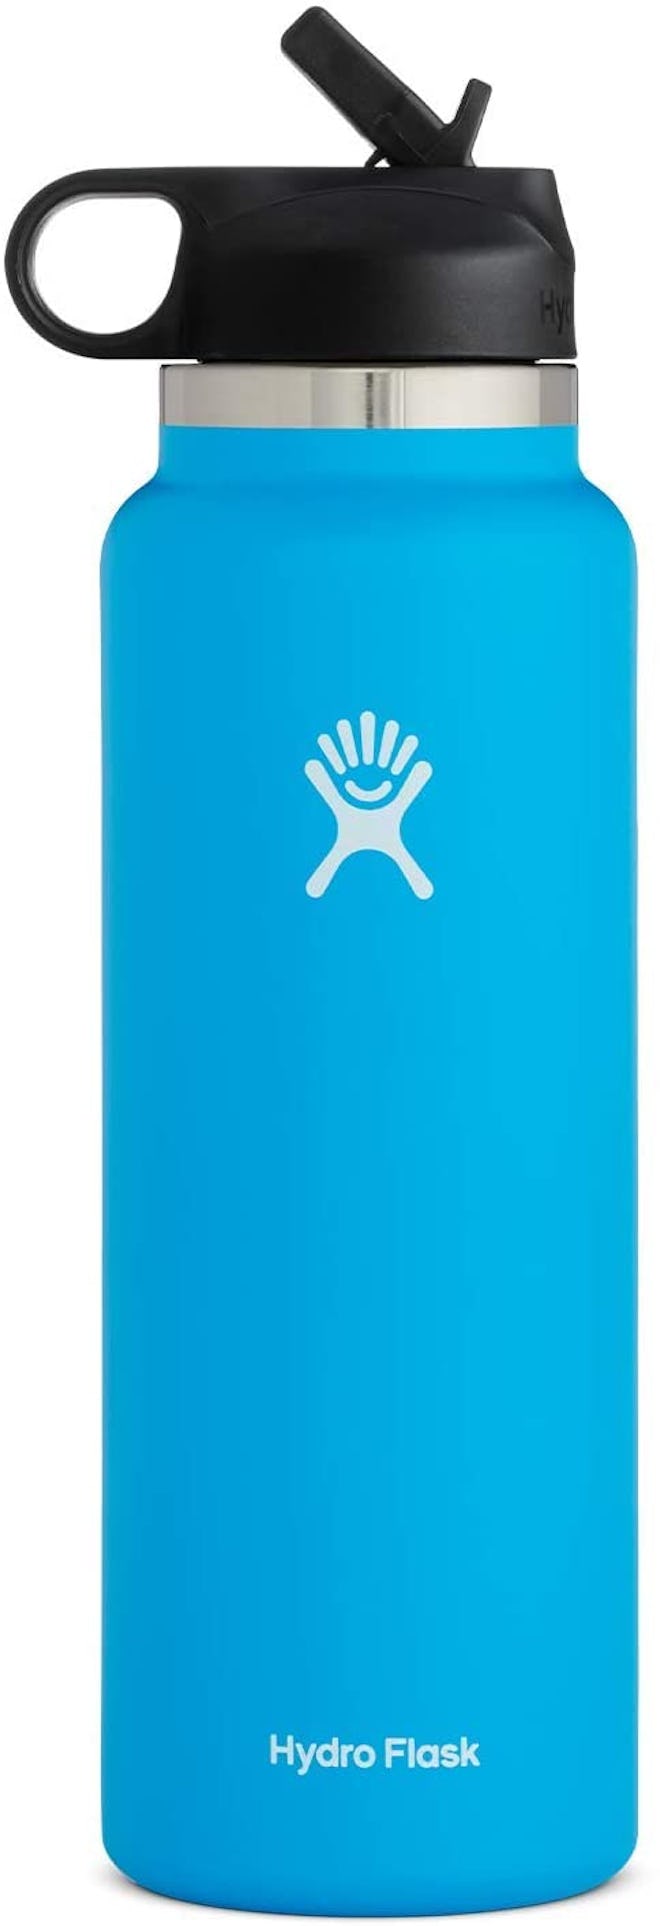 Hydro Flask Sports Bottle With Straw Lid